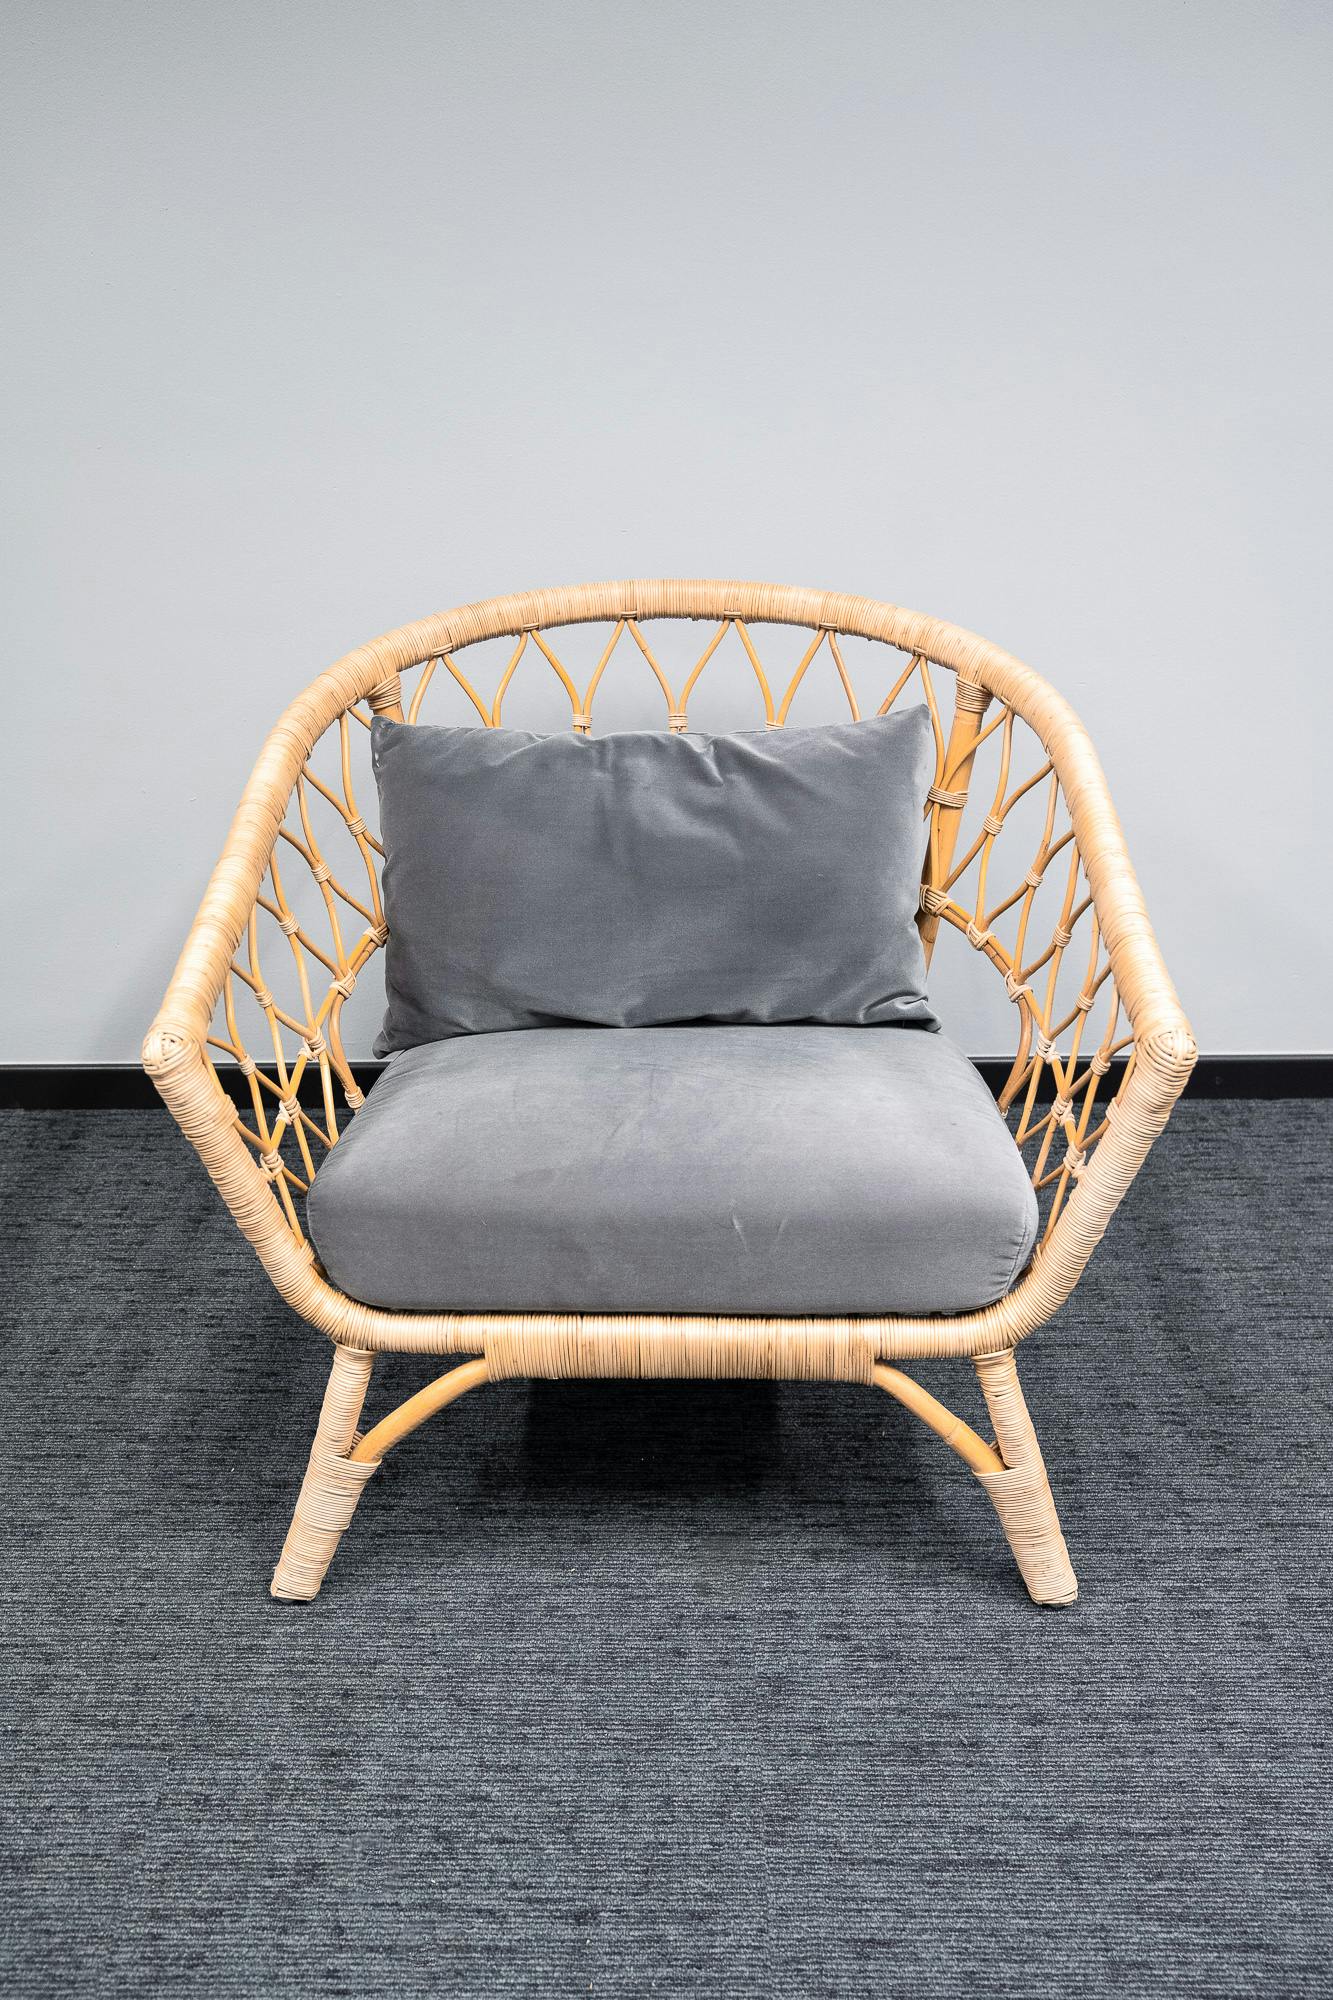 Wicker armchair with grey cushions - Relieve Furniture